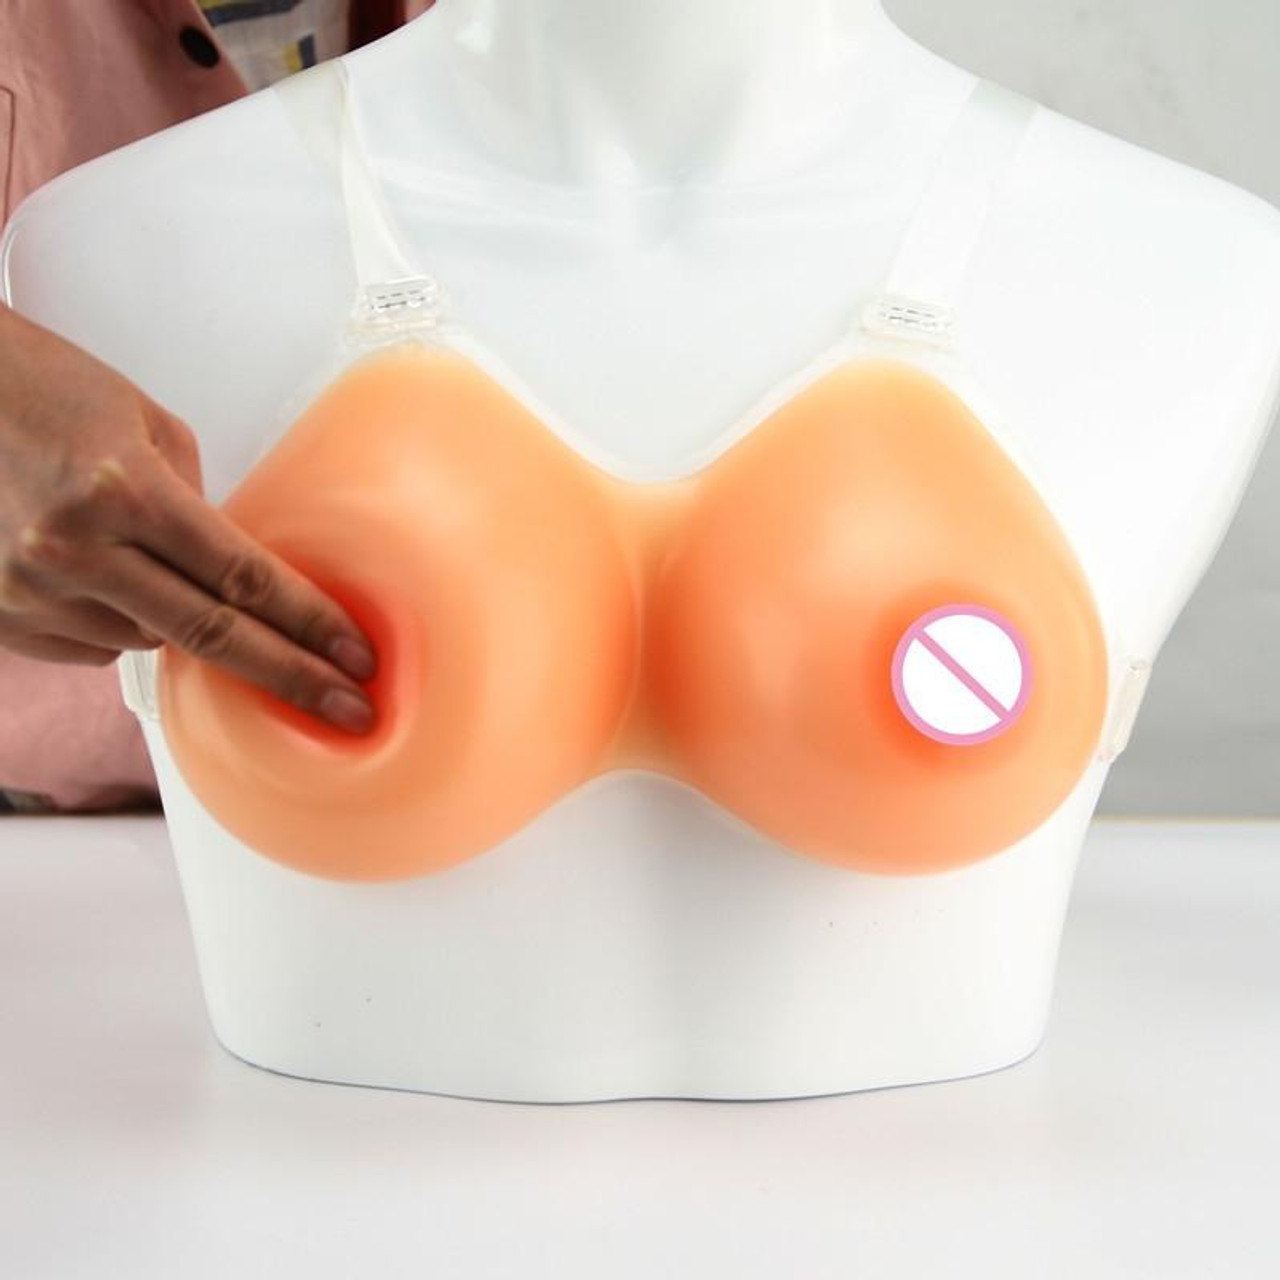 Silicone breast push-up all-in-one cross-dressing bra, fake